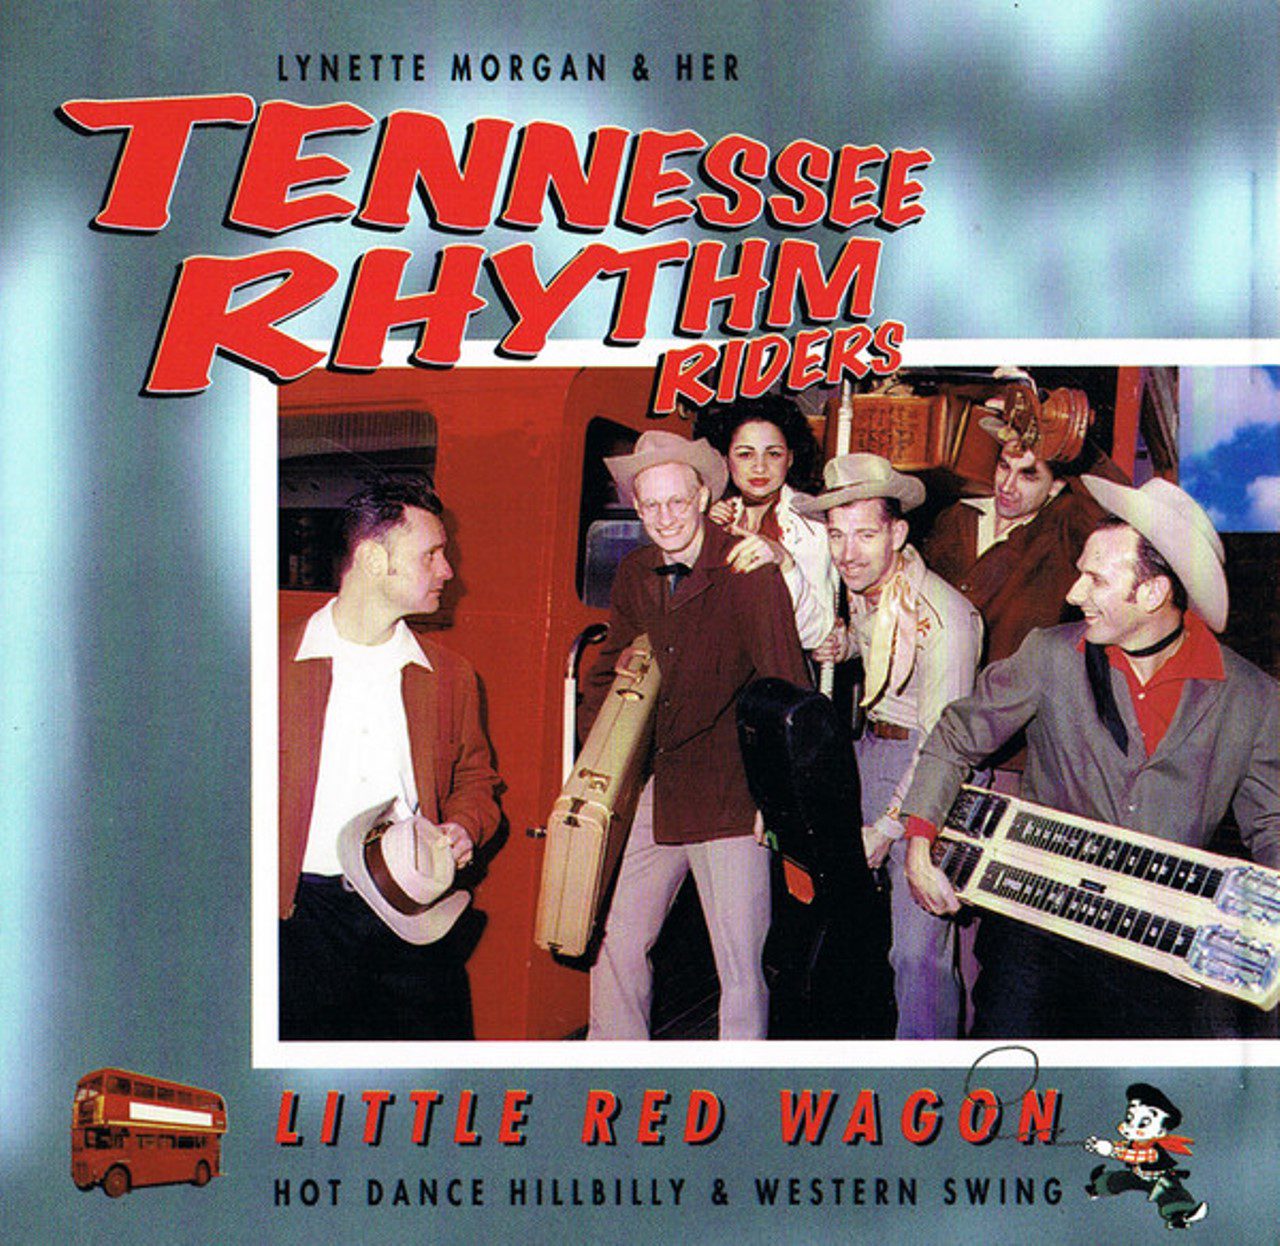 Tennessee Rhythm Riders - Little Red Wagon cover album